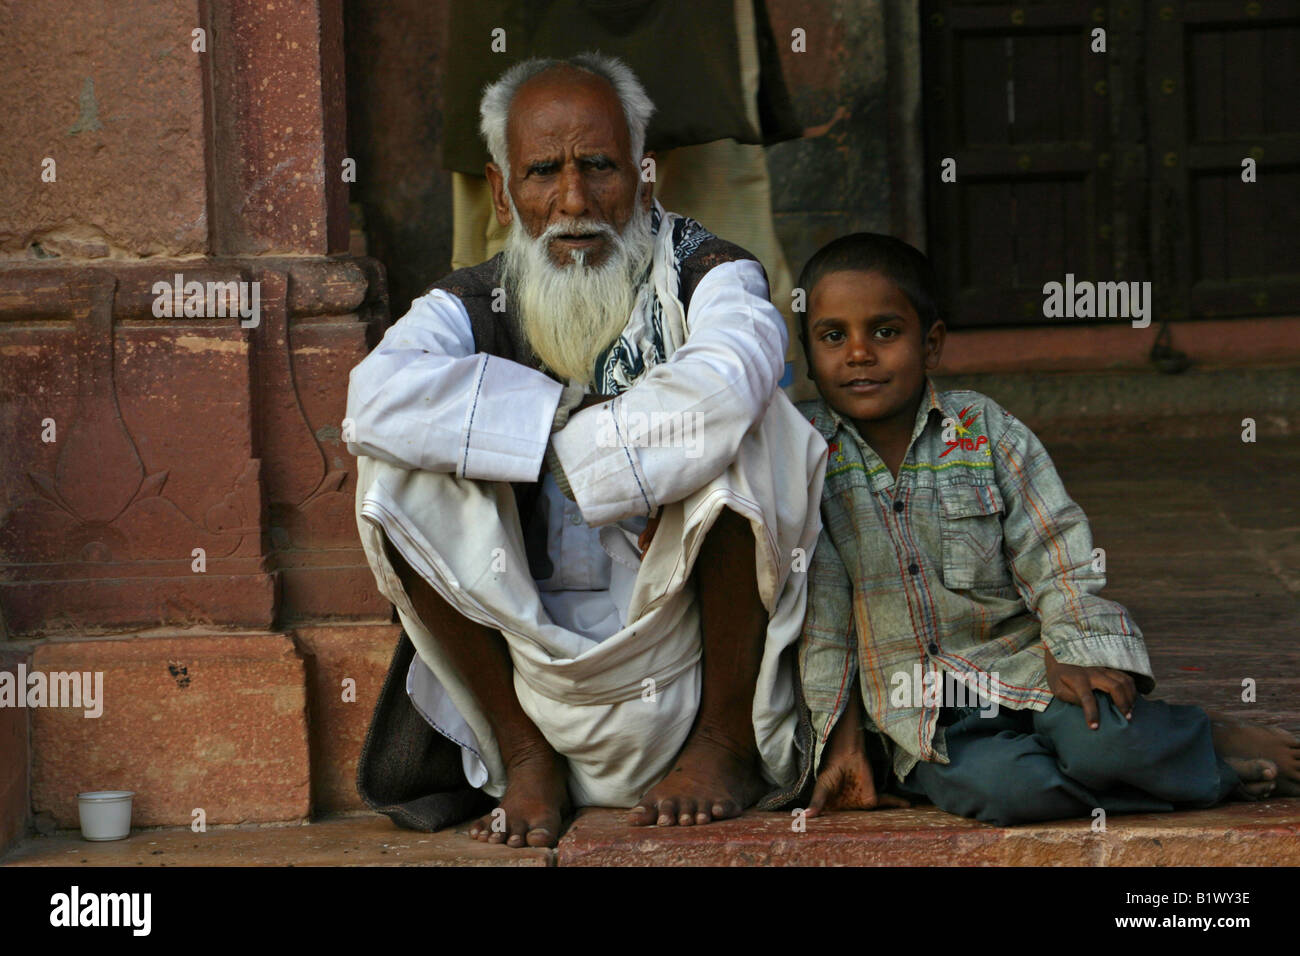 Young boy and elderly man in fatehpur sikri Stock Photo